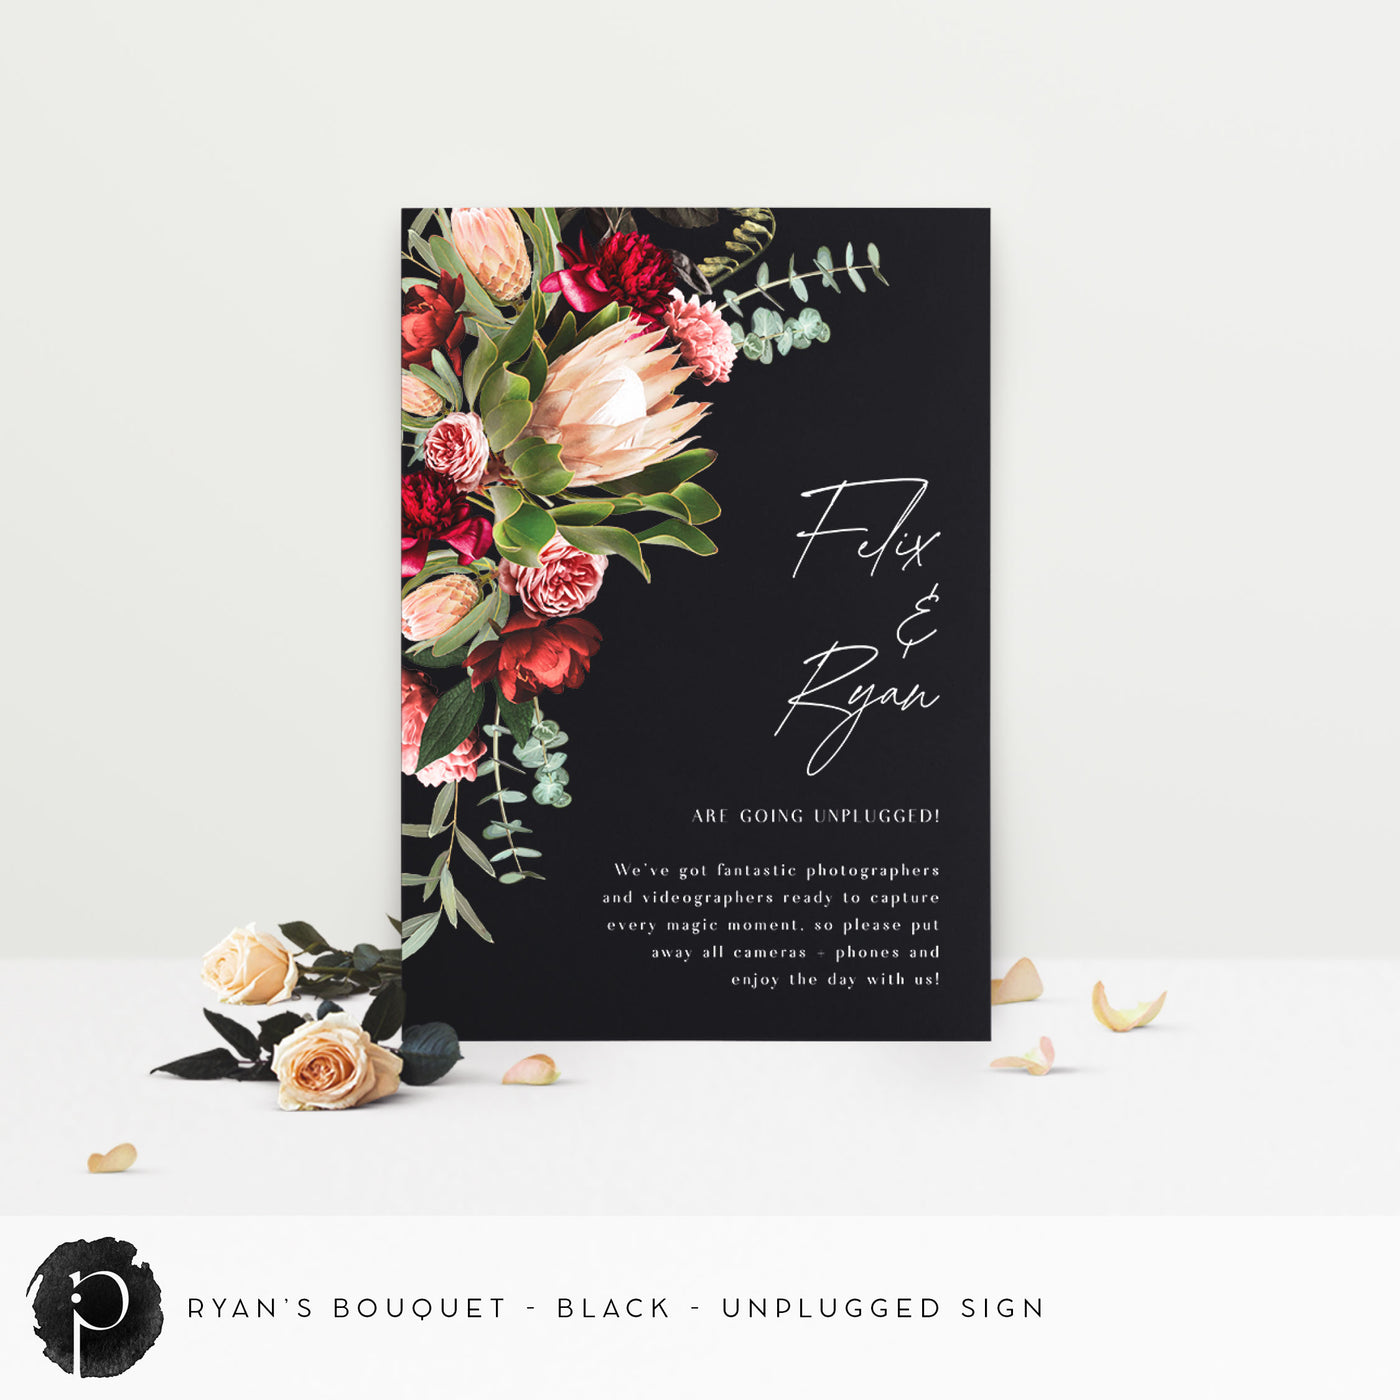 Ryan's Bouquet - Unplugged Ceremony Sign